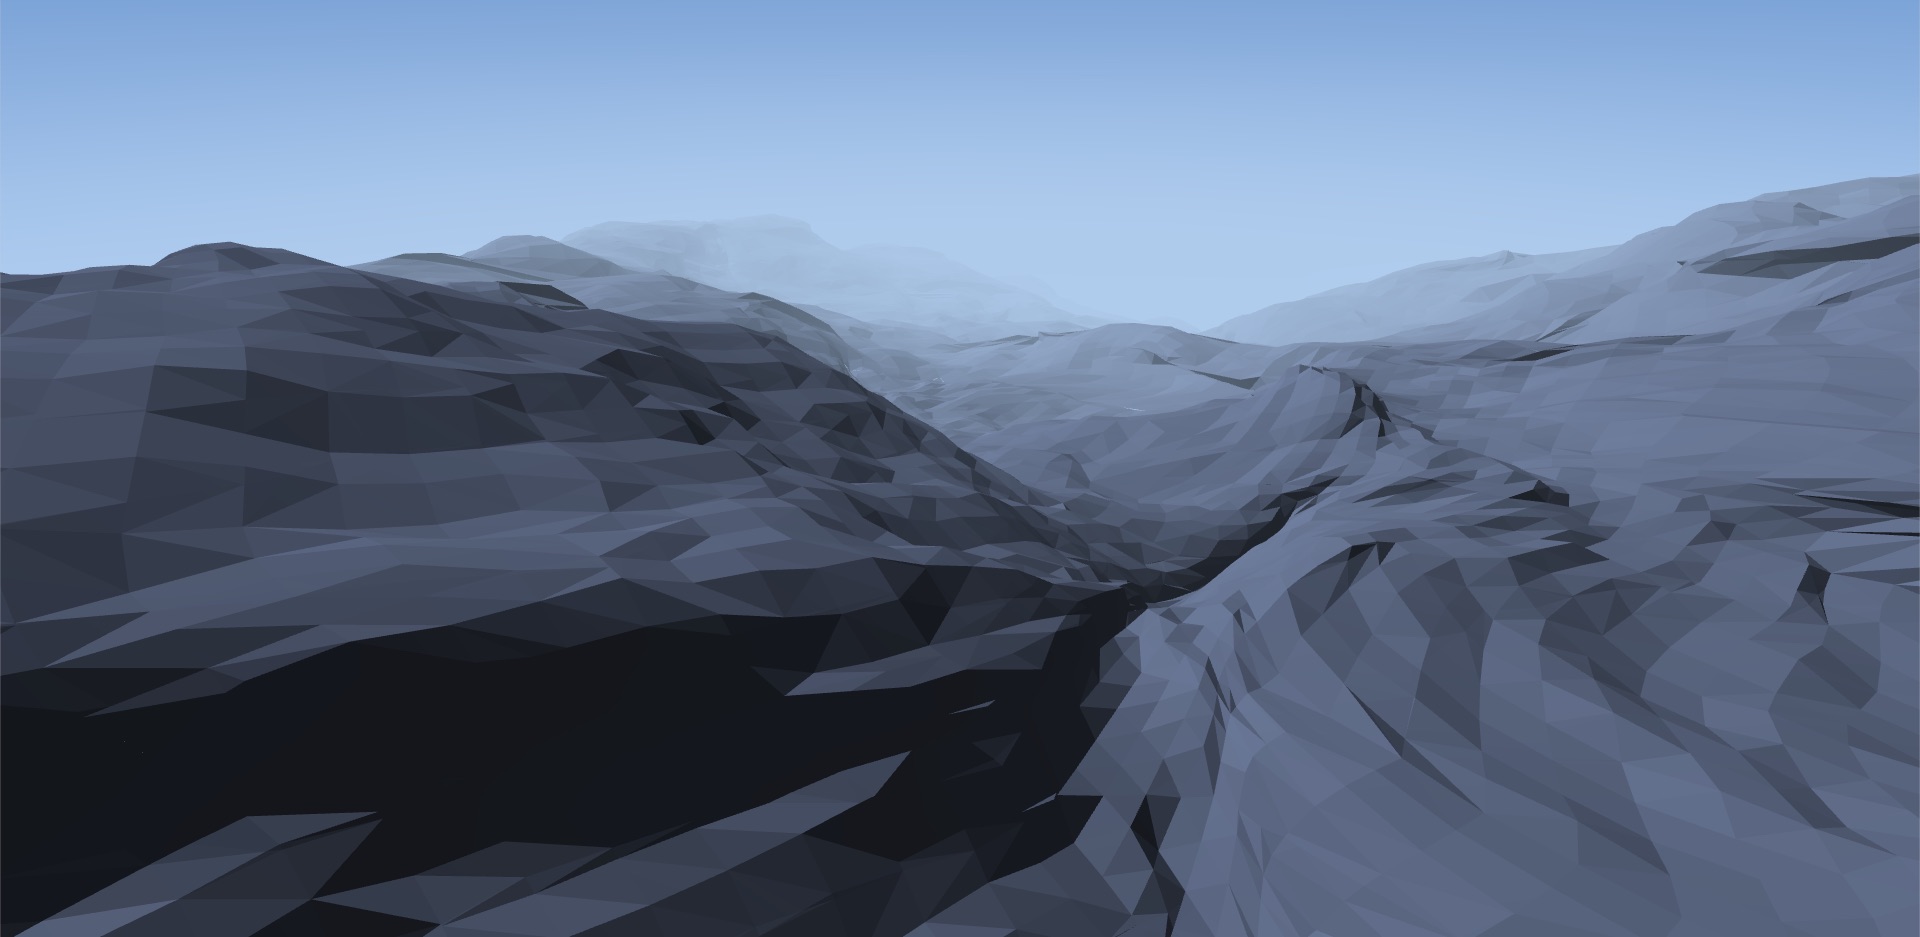 Distortion fields are used to "curl" the terrain.